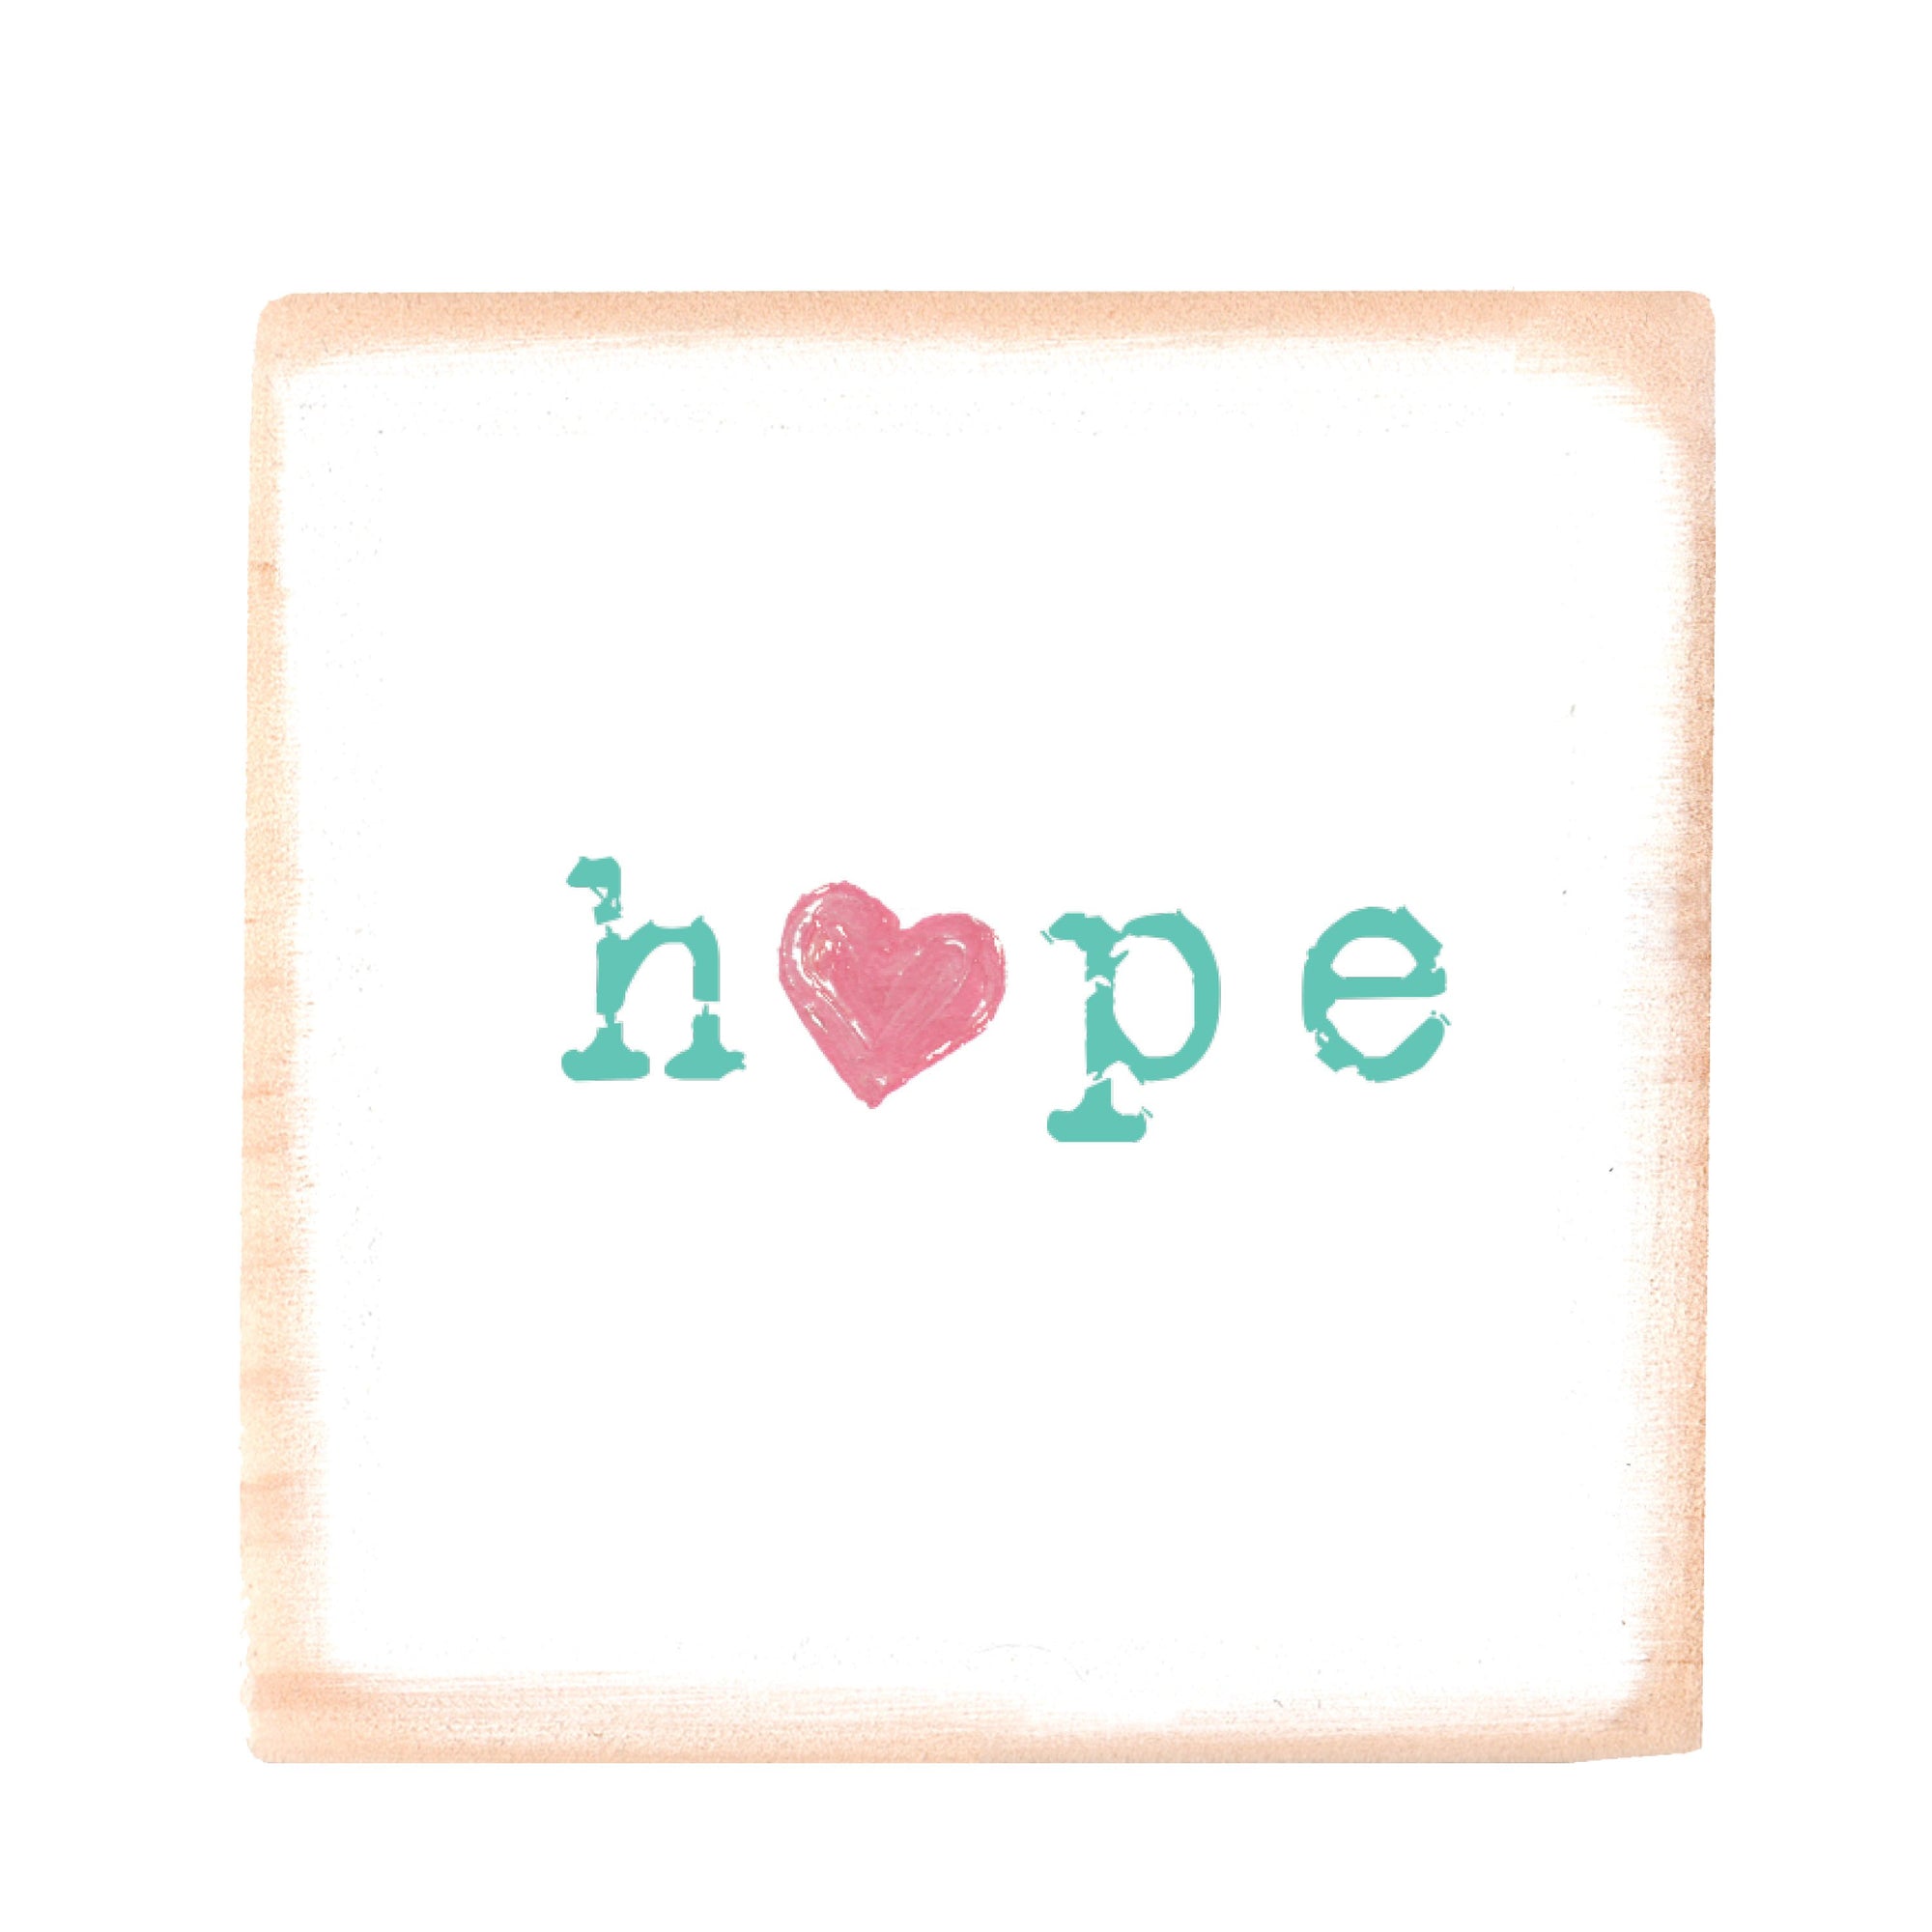 hope with heart square wood block